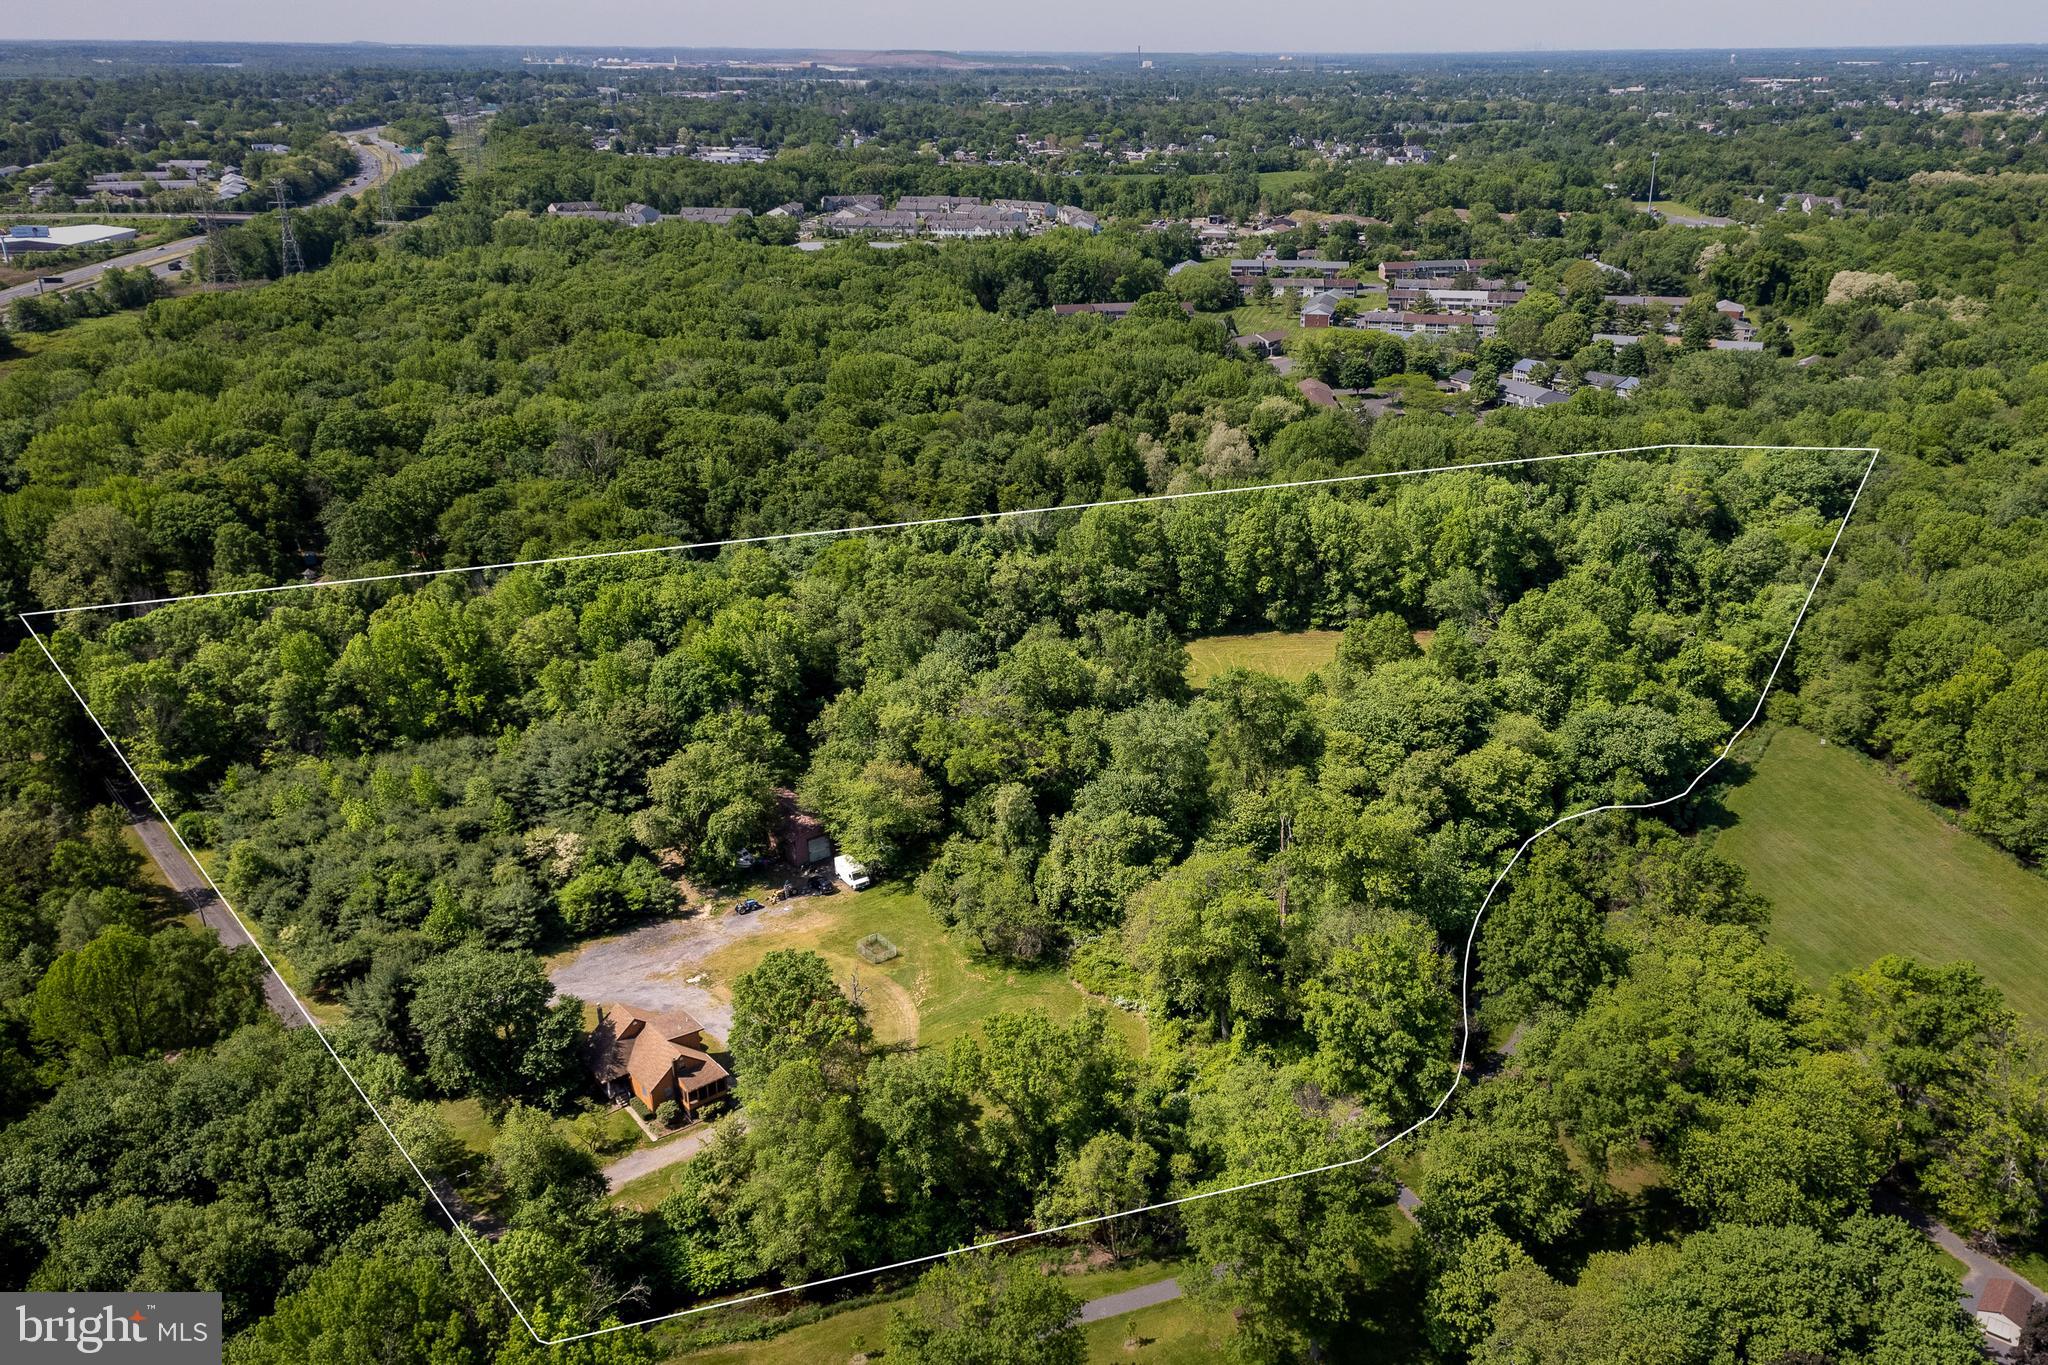 an aerial view of a forest with houses